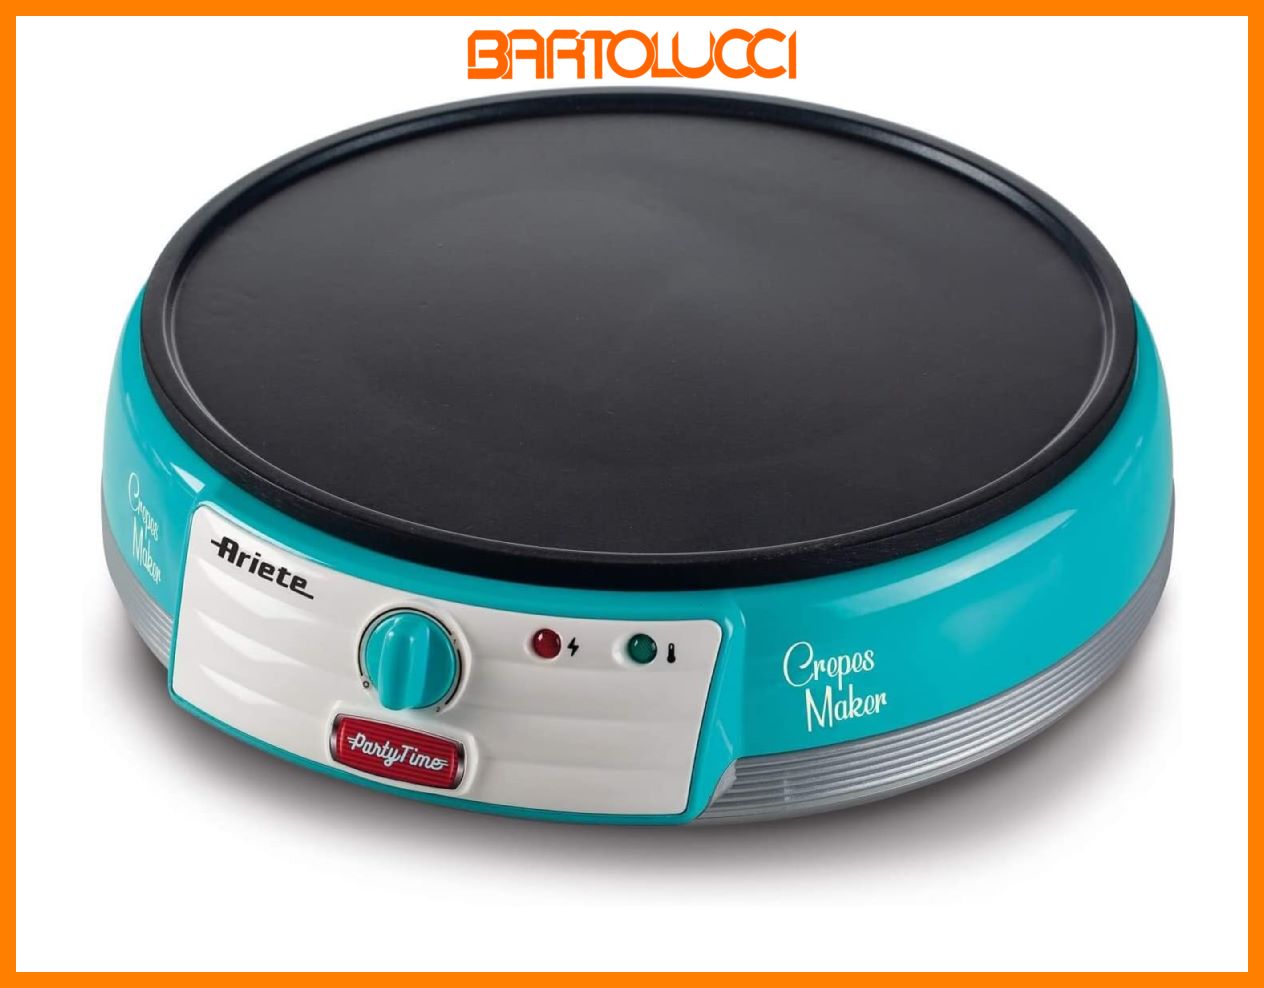 Ariete 202 Crepes Maker Party Time, Piastra per Crepes Antiaderente, 2 spatole i